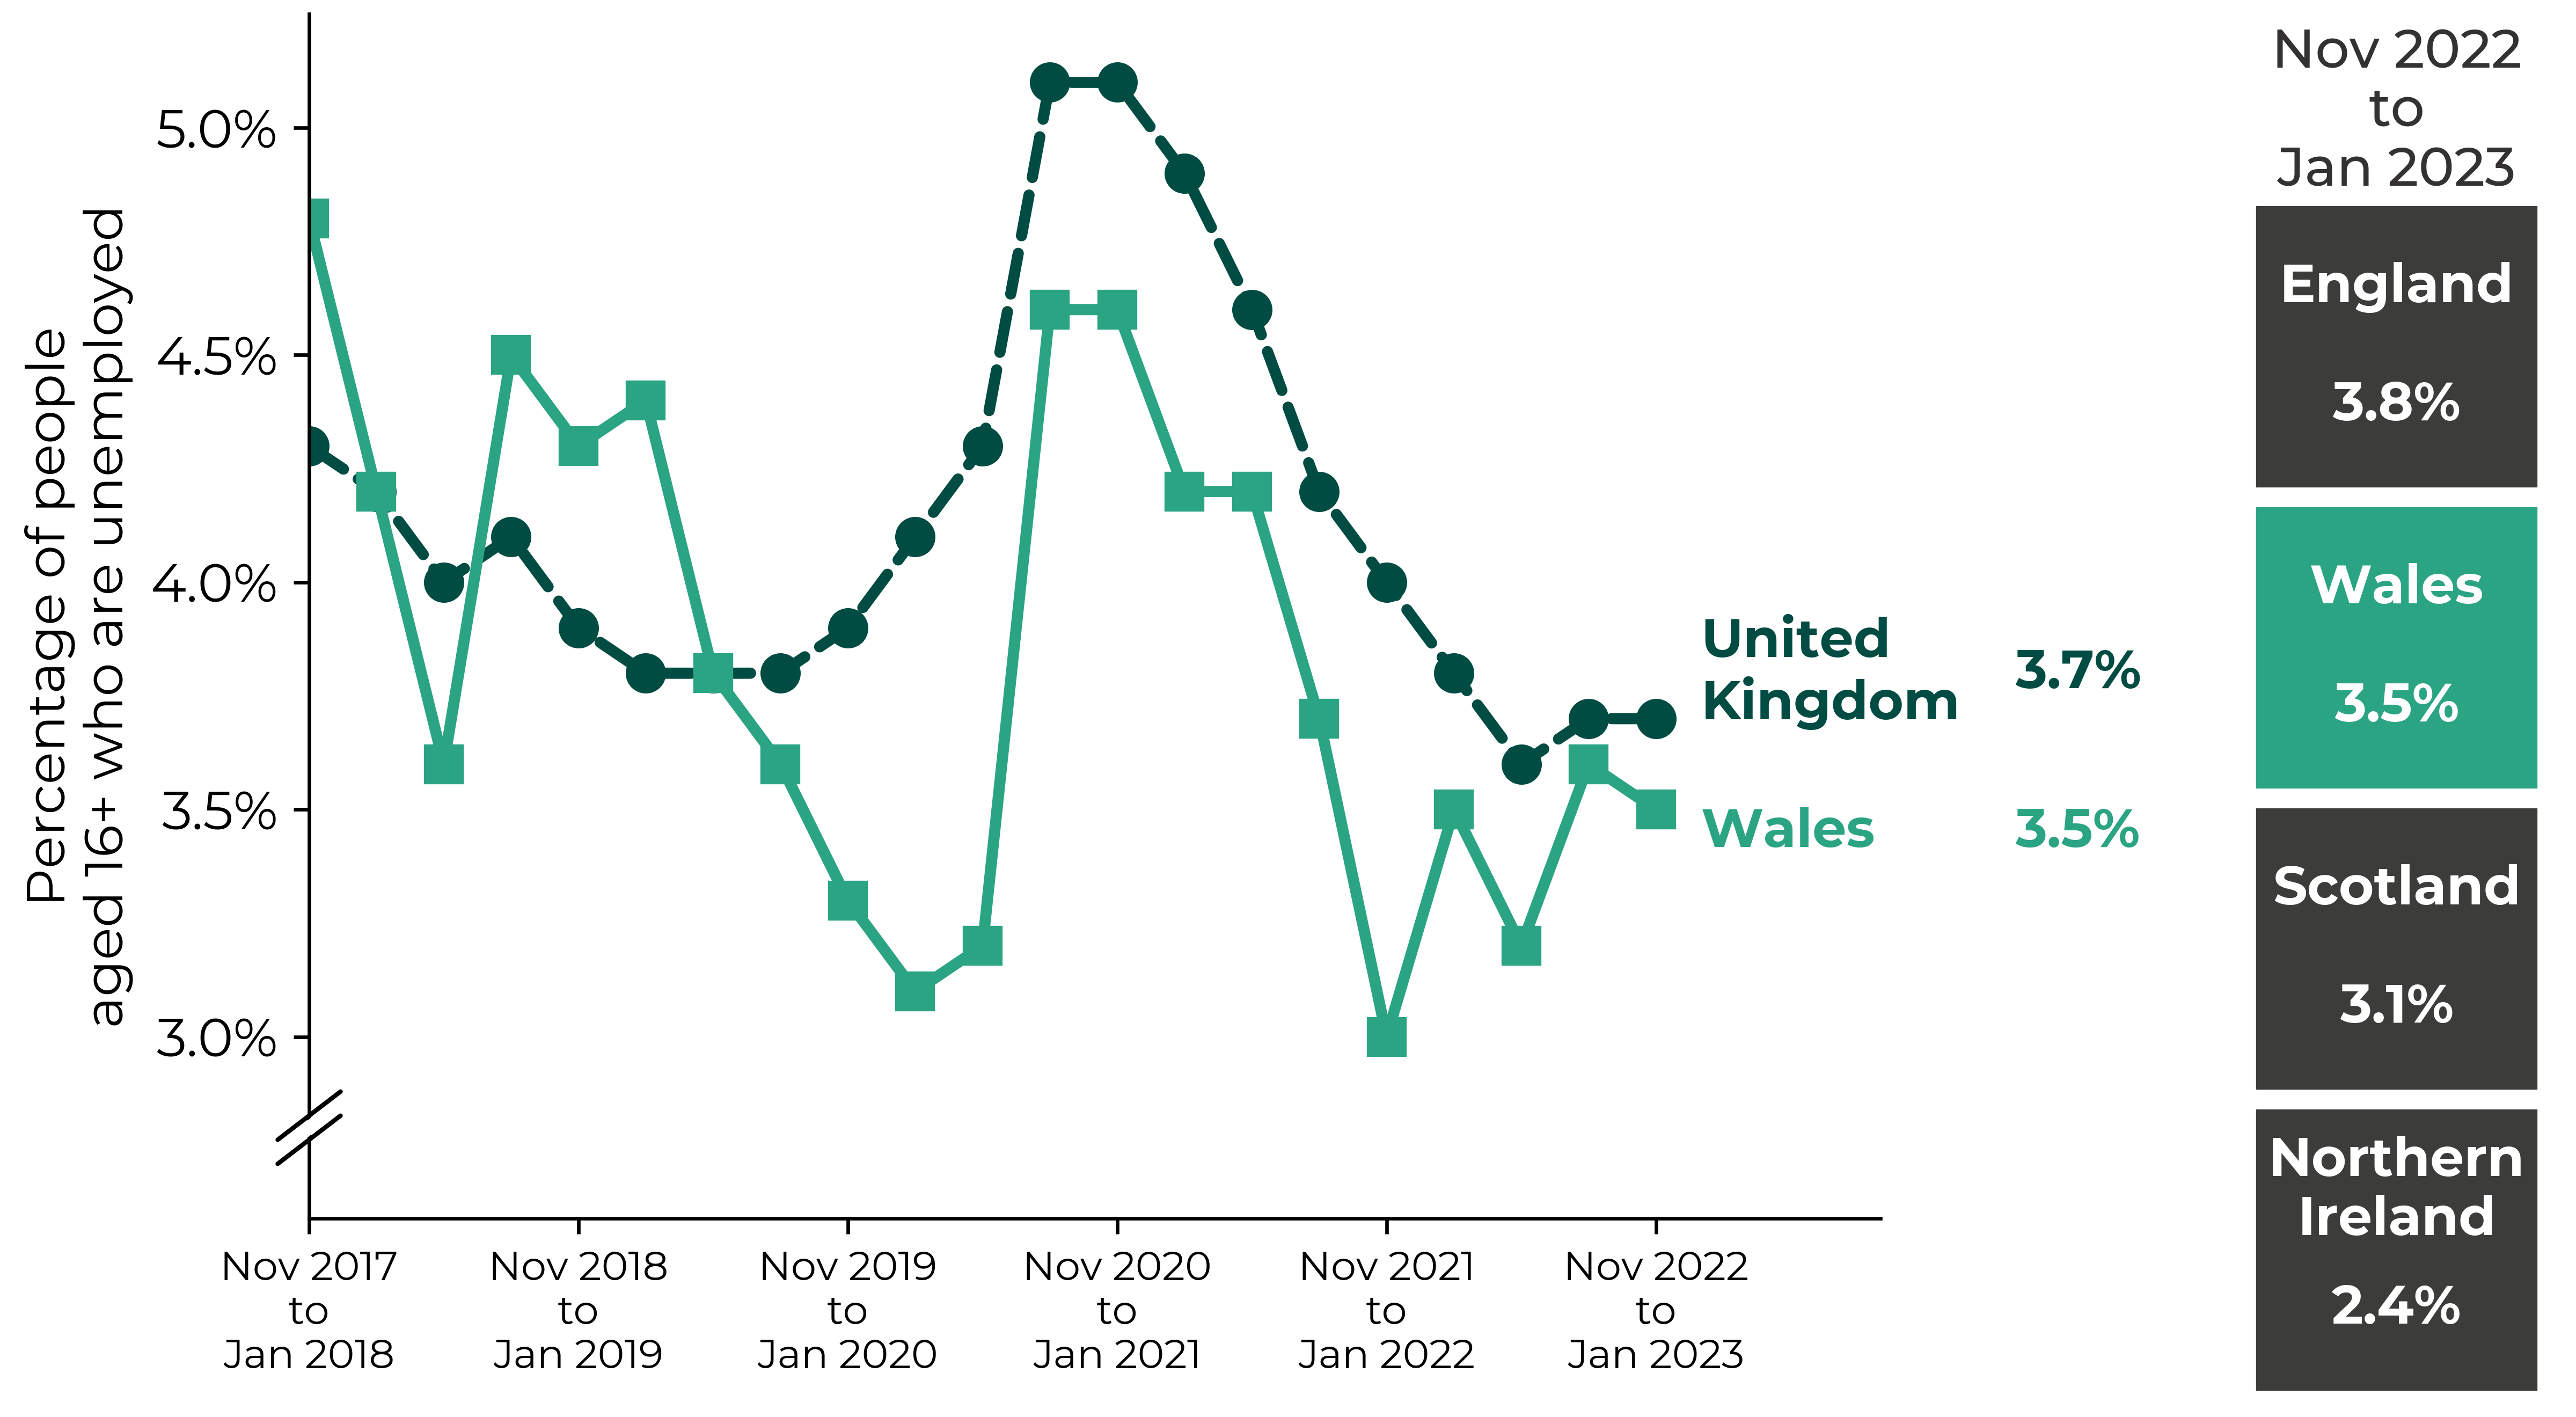 Graph showing an overall decrease in Wales' unemployment rate from over 4.5% in 2017 to under 3% in early 2020. This was followed by a peak of almost 5% during the period December 2020 to February 2021. UK unemployment rate followed a similar pattern. Figures for the latest period (November 2022 to January 2023) are Northern Ireland 2.4%, Scotland 3.1%, Wales 3.5%, England 3.8% and UK 3.7%.